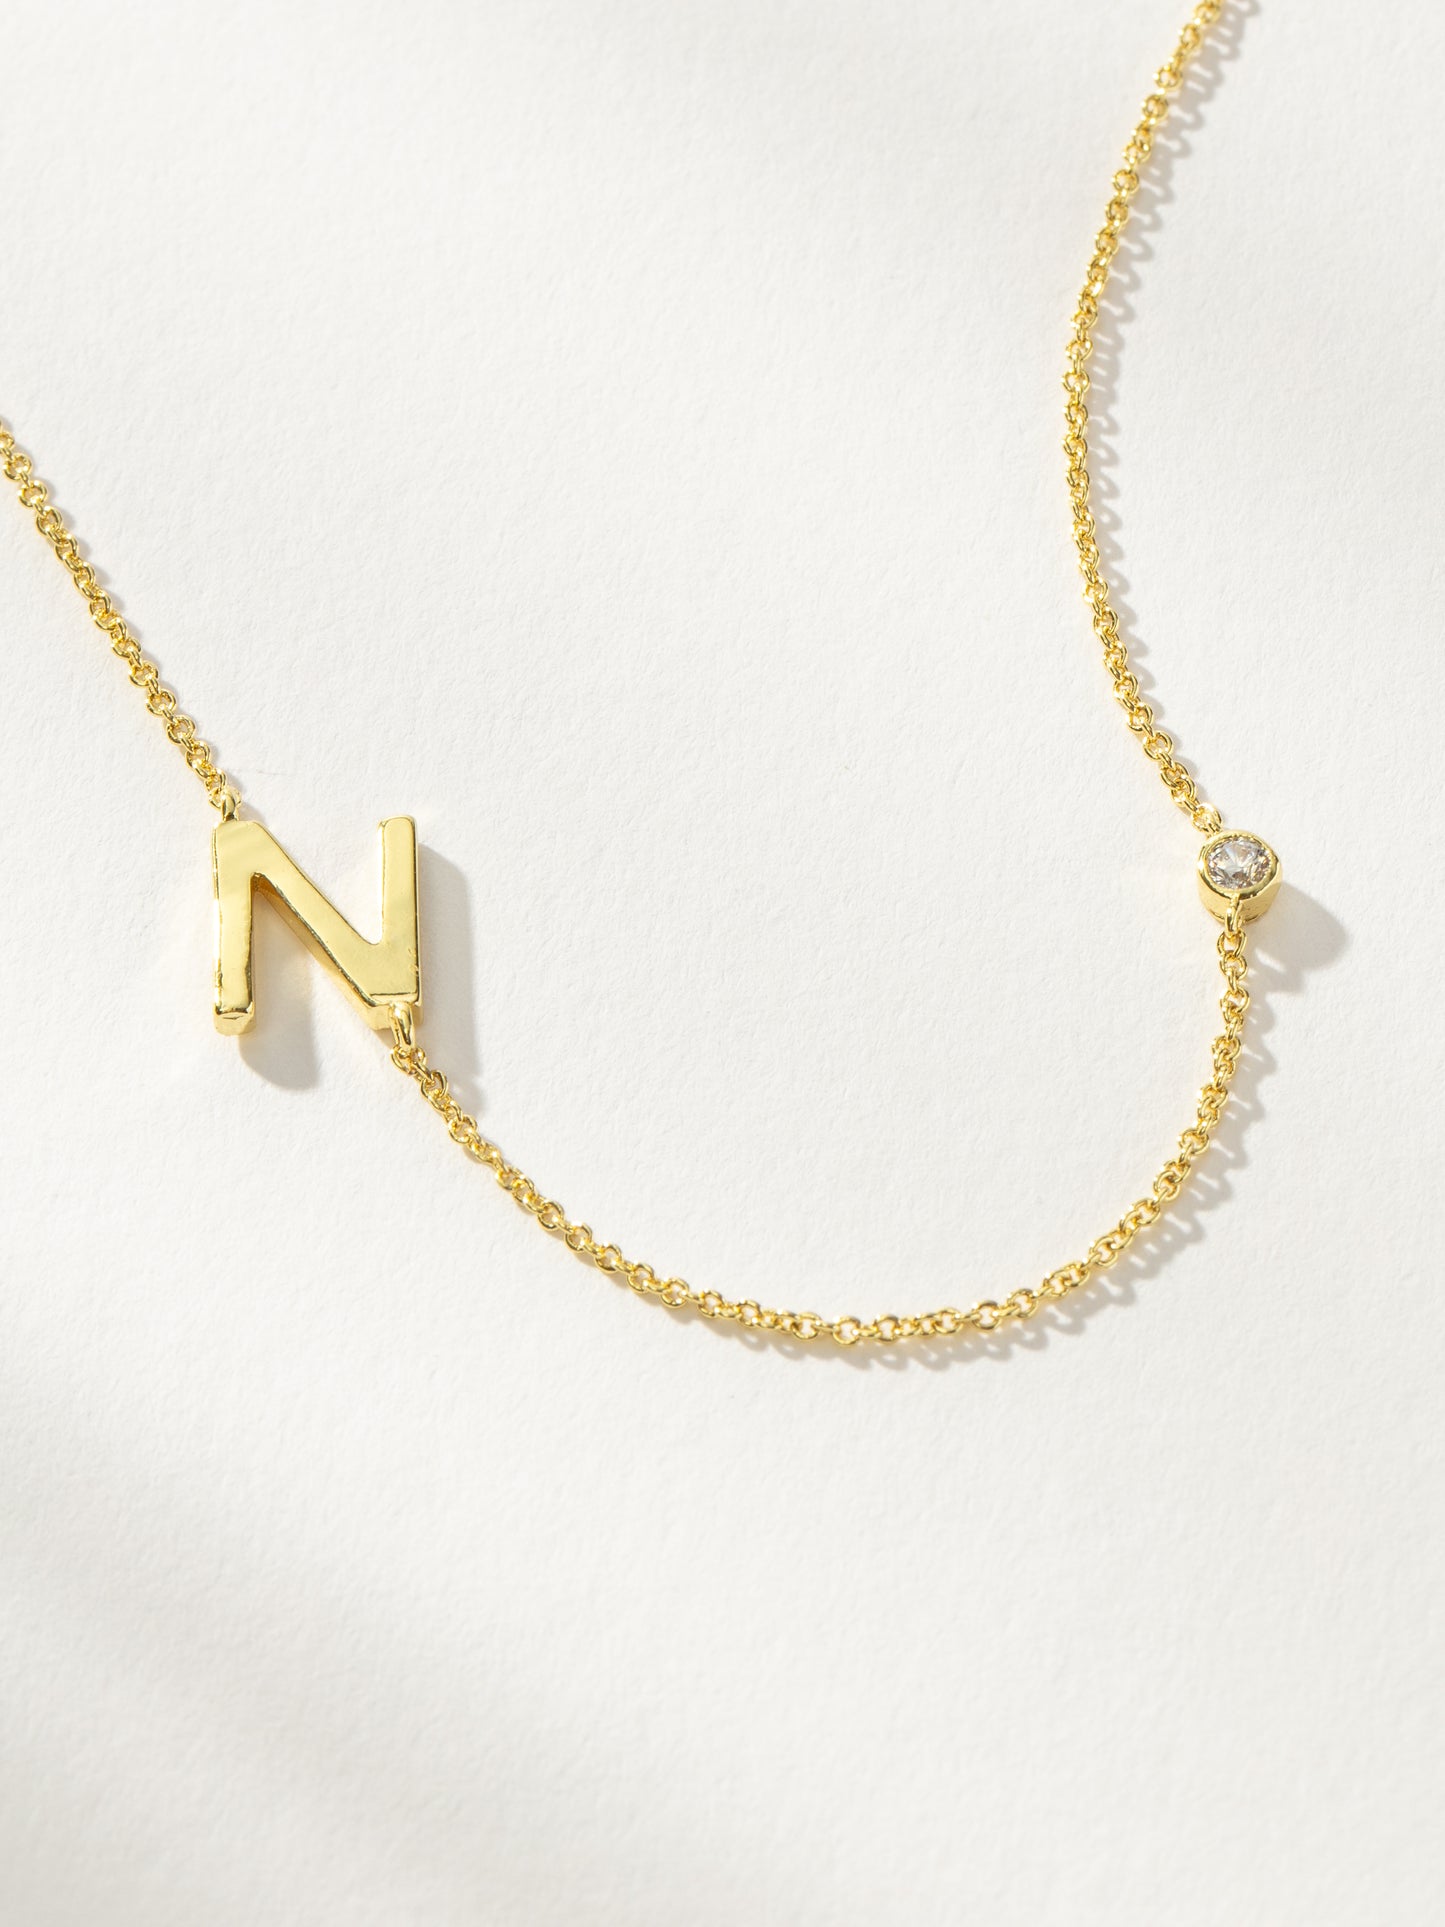 Personalized Touch Necklace | Gold N | Product Image | Uncommon James